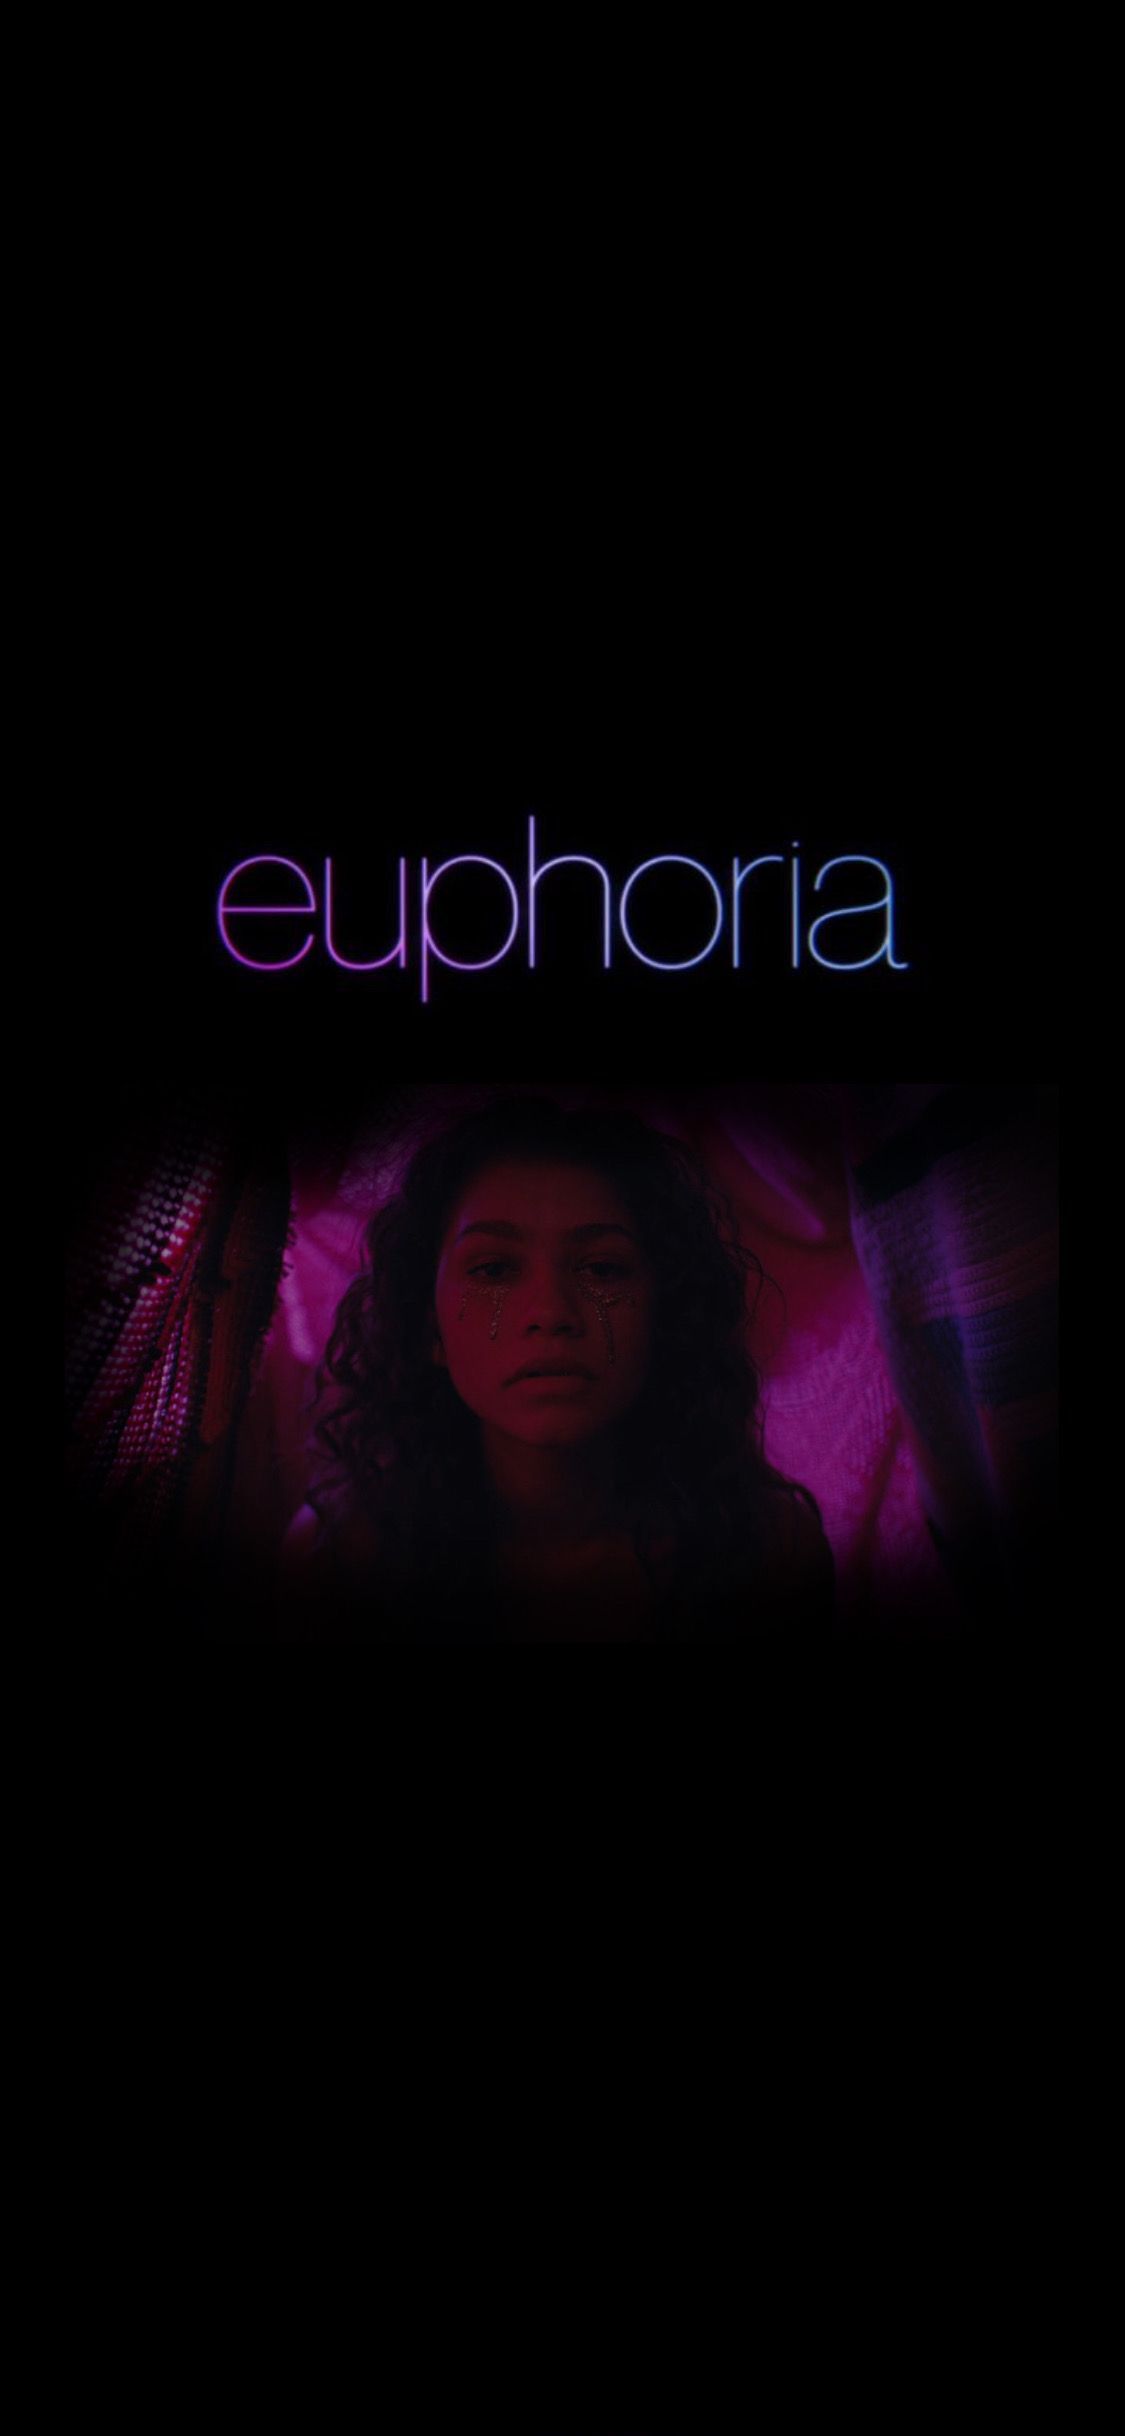 Euphoria iPhone Wallpaper with high-resolution 1080x1920 pixel. You can use this wallpaper for your iPhone 5, 6, 7, 8, X, XS, XR backgrounds, Mobile Screensaver, or iPad Lock Screen - Euphoria